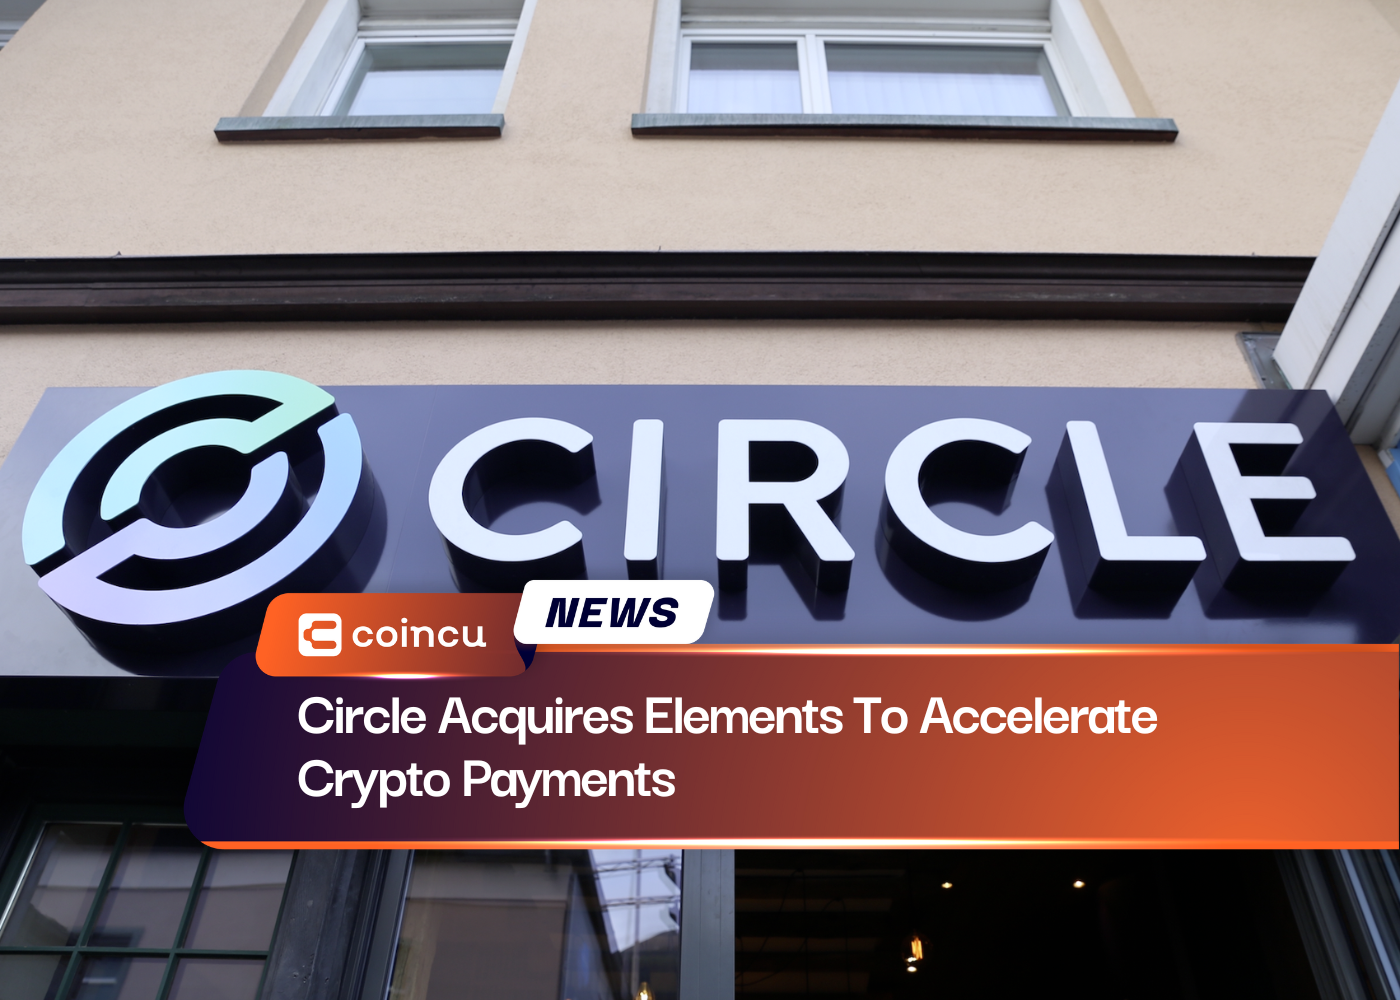 Circle Acquires Elements To Accelerate Crypto Payments